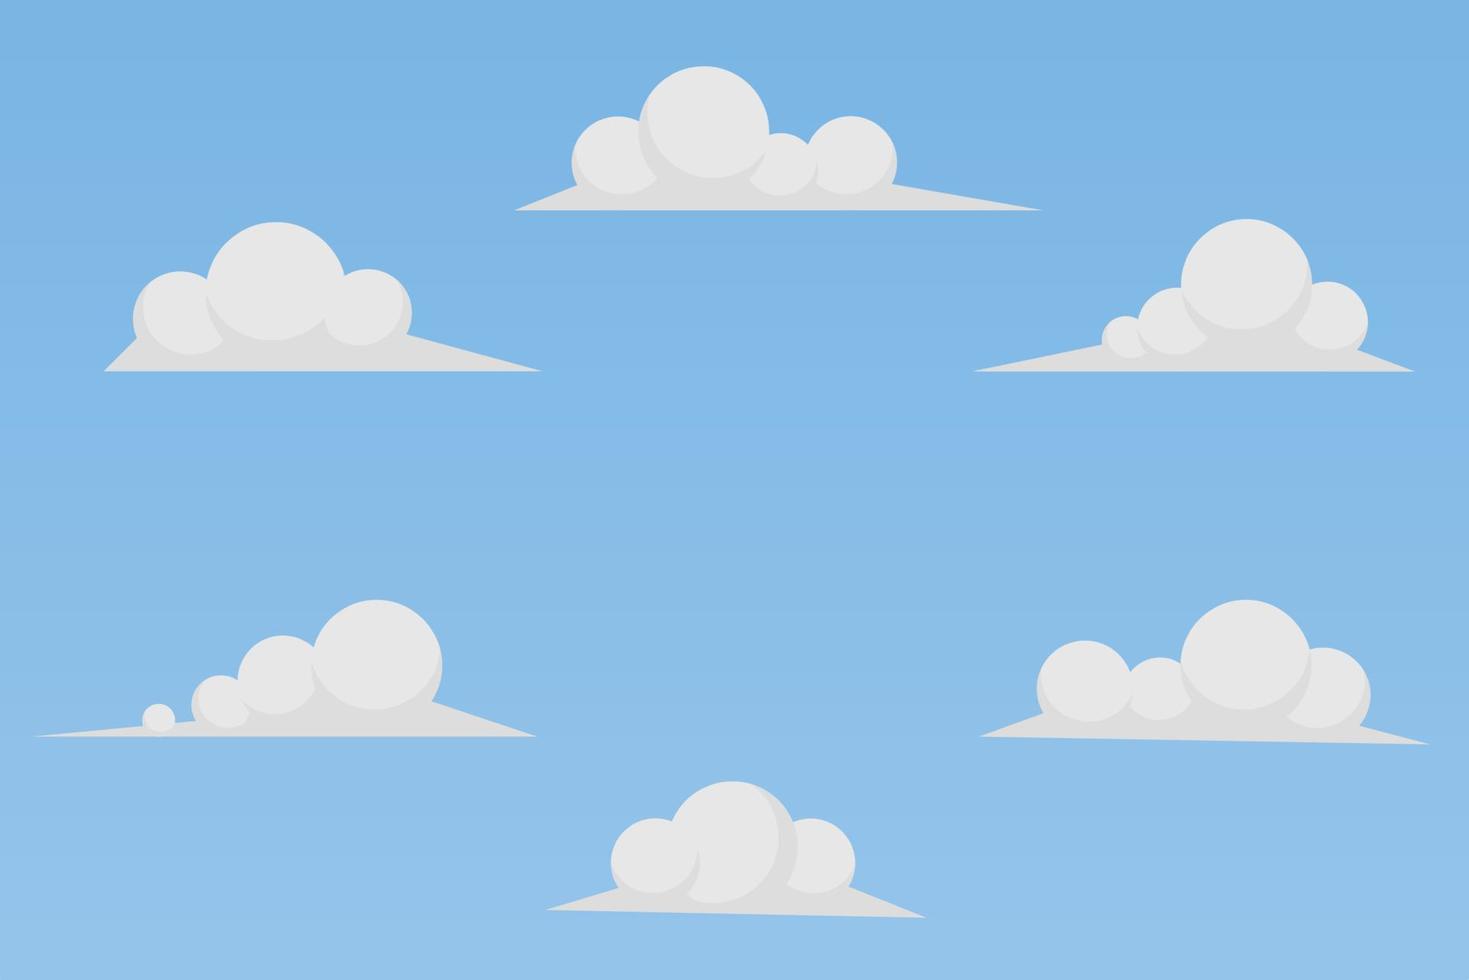 set of flat cloud vector illustrations with simple design and different shapes on blue background